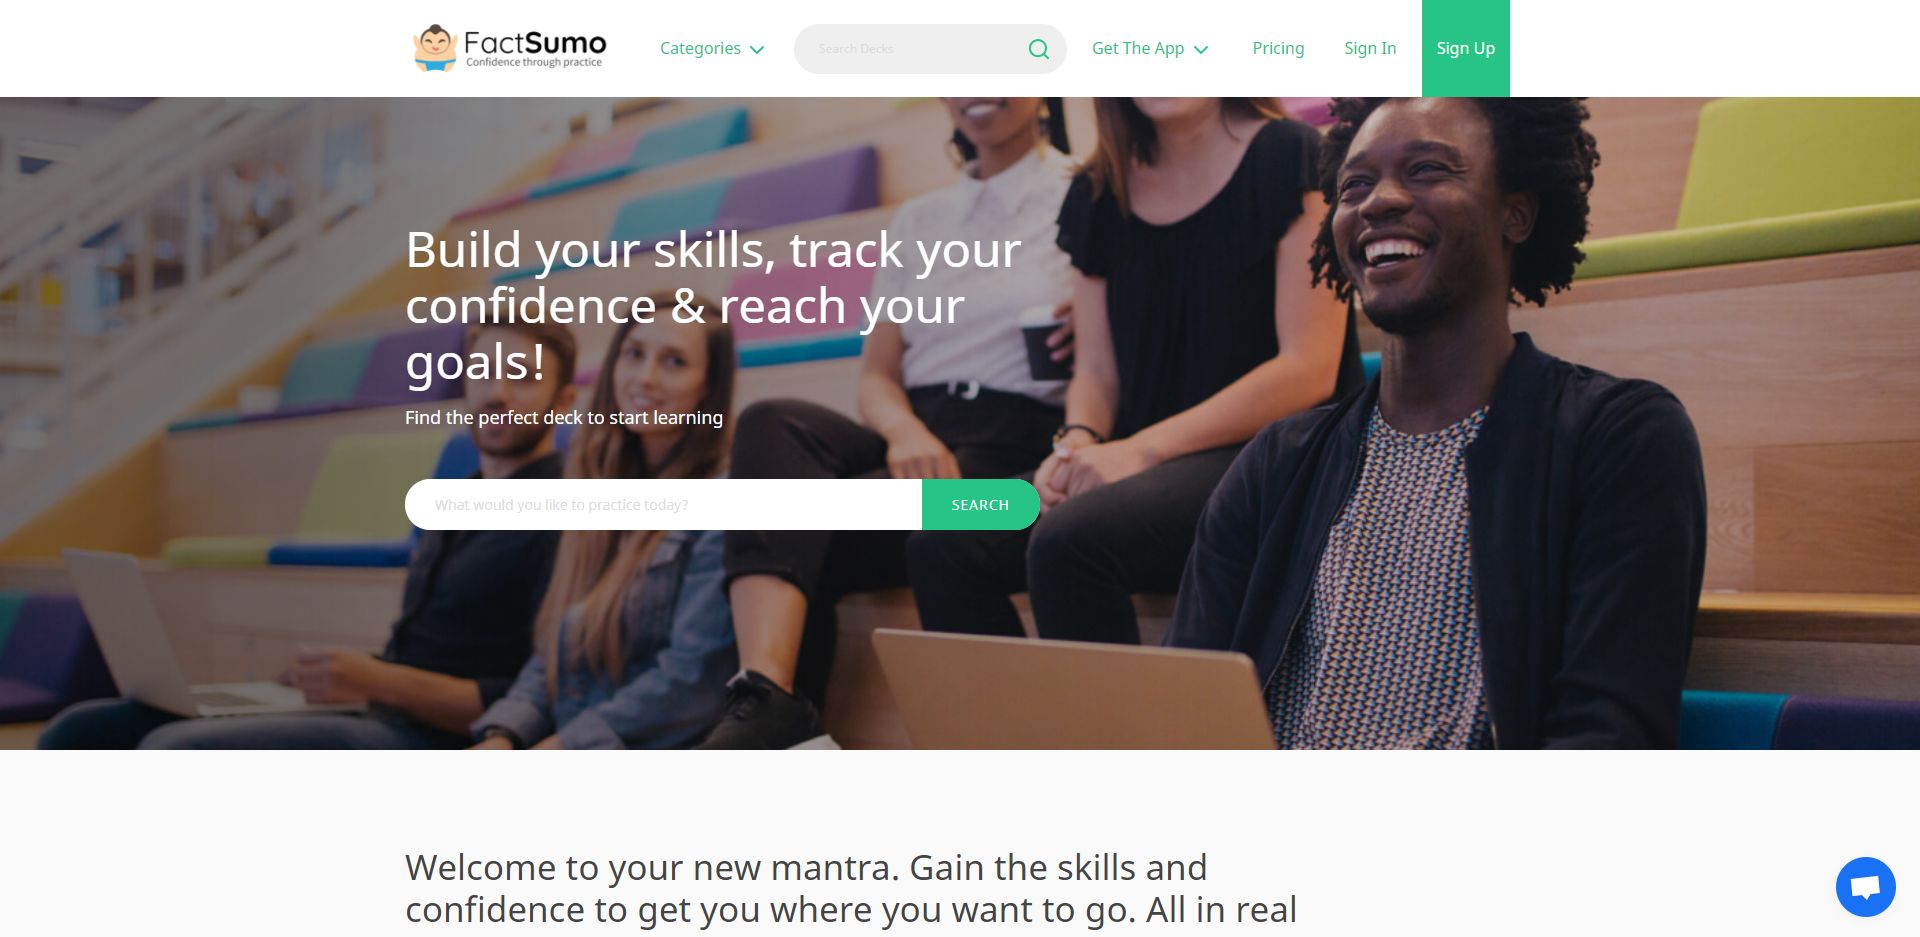 FactSumo Learning App